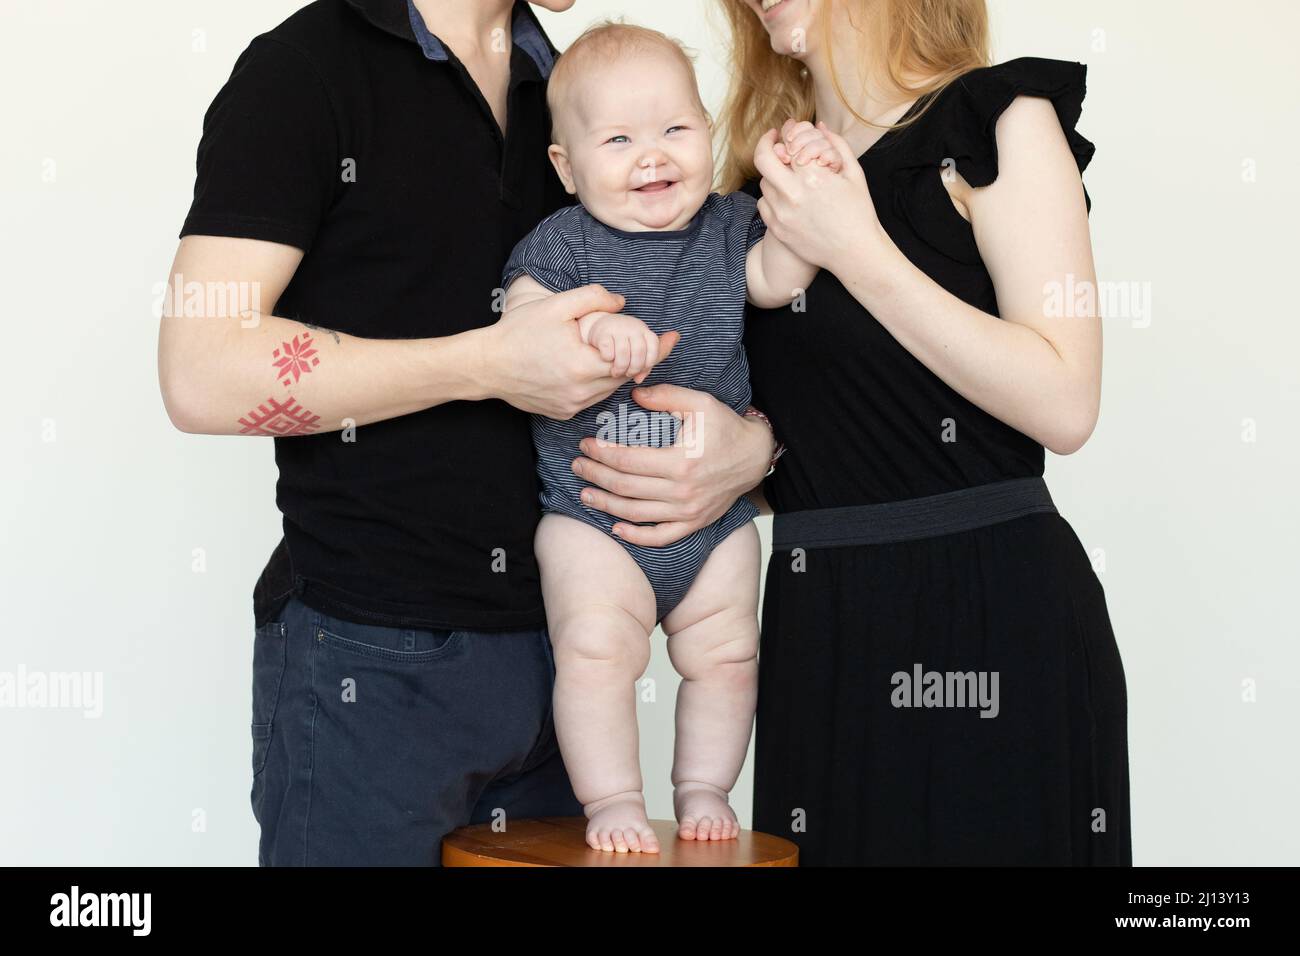 Laughing baby on chair. Cropped photo of traditional full family, standing and embrace together. Caring infant, protect Stock Photo